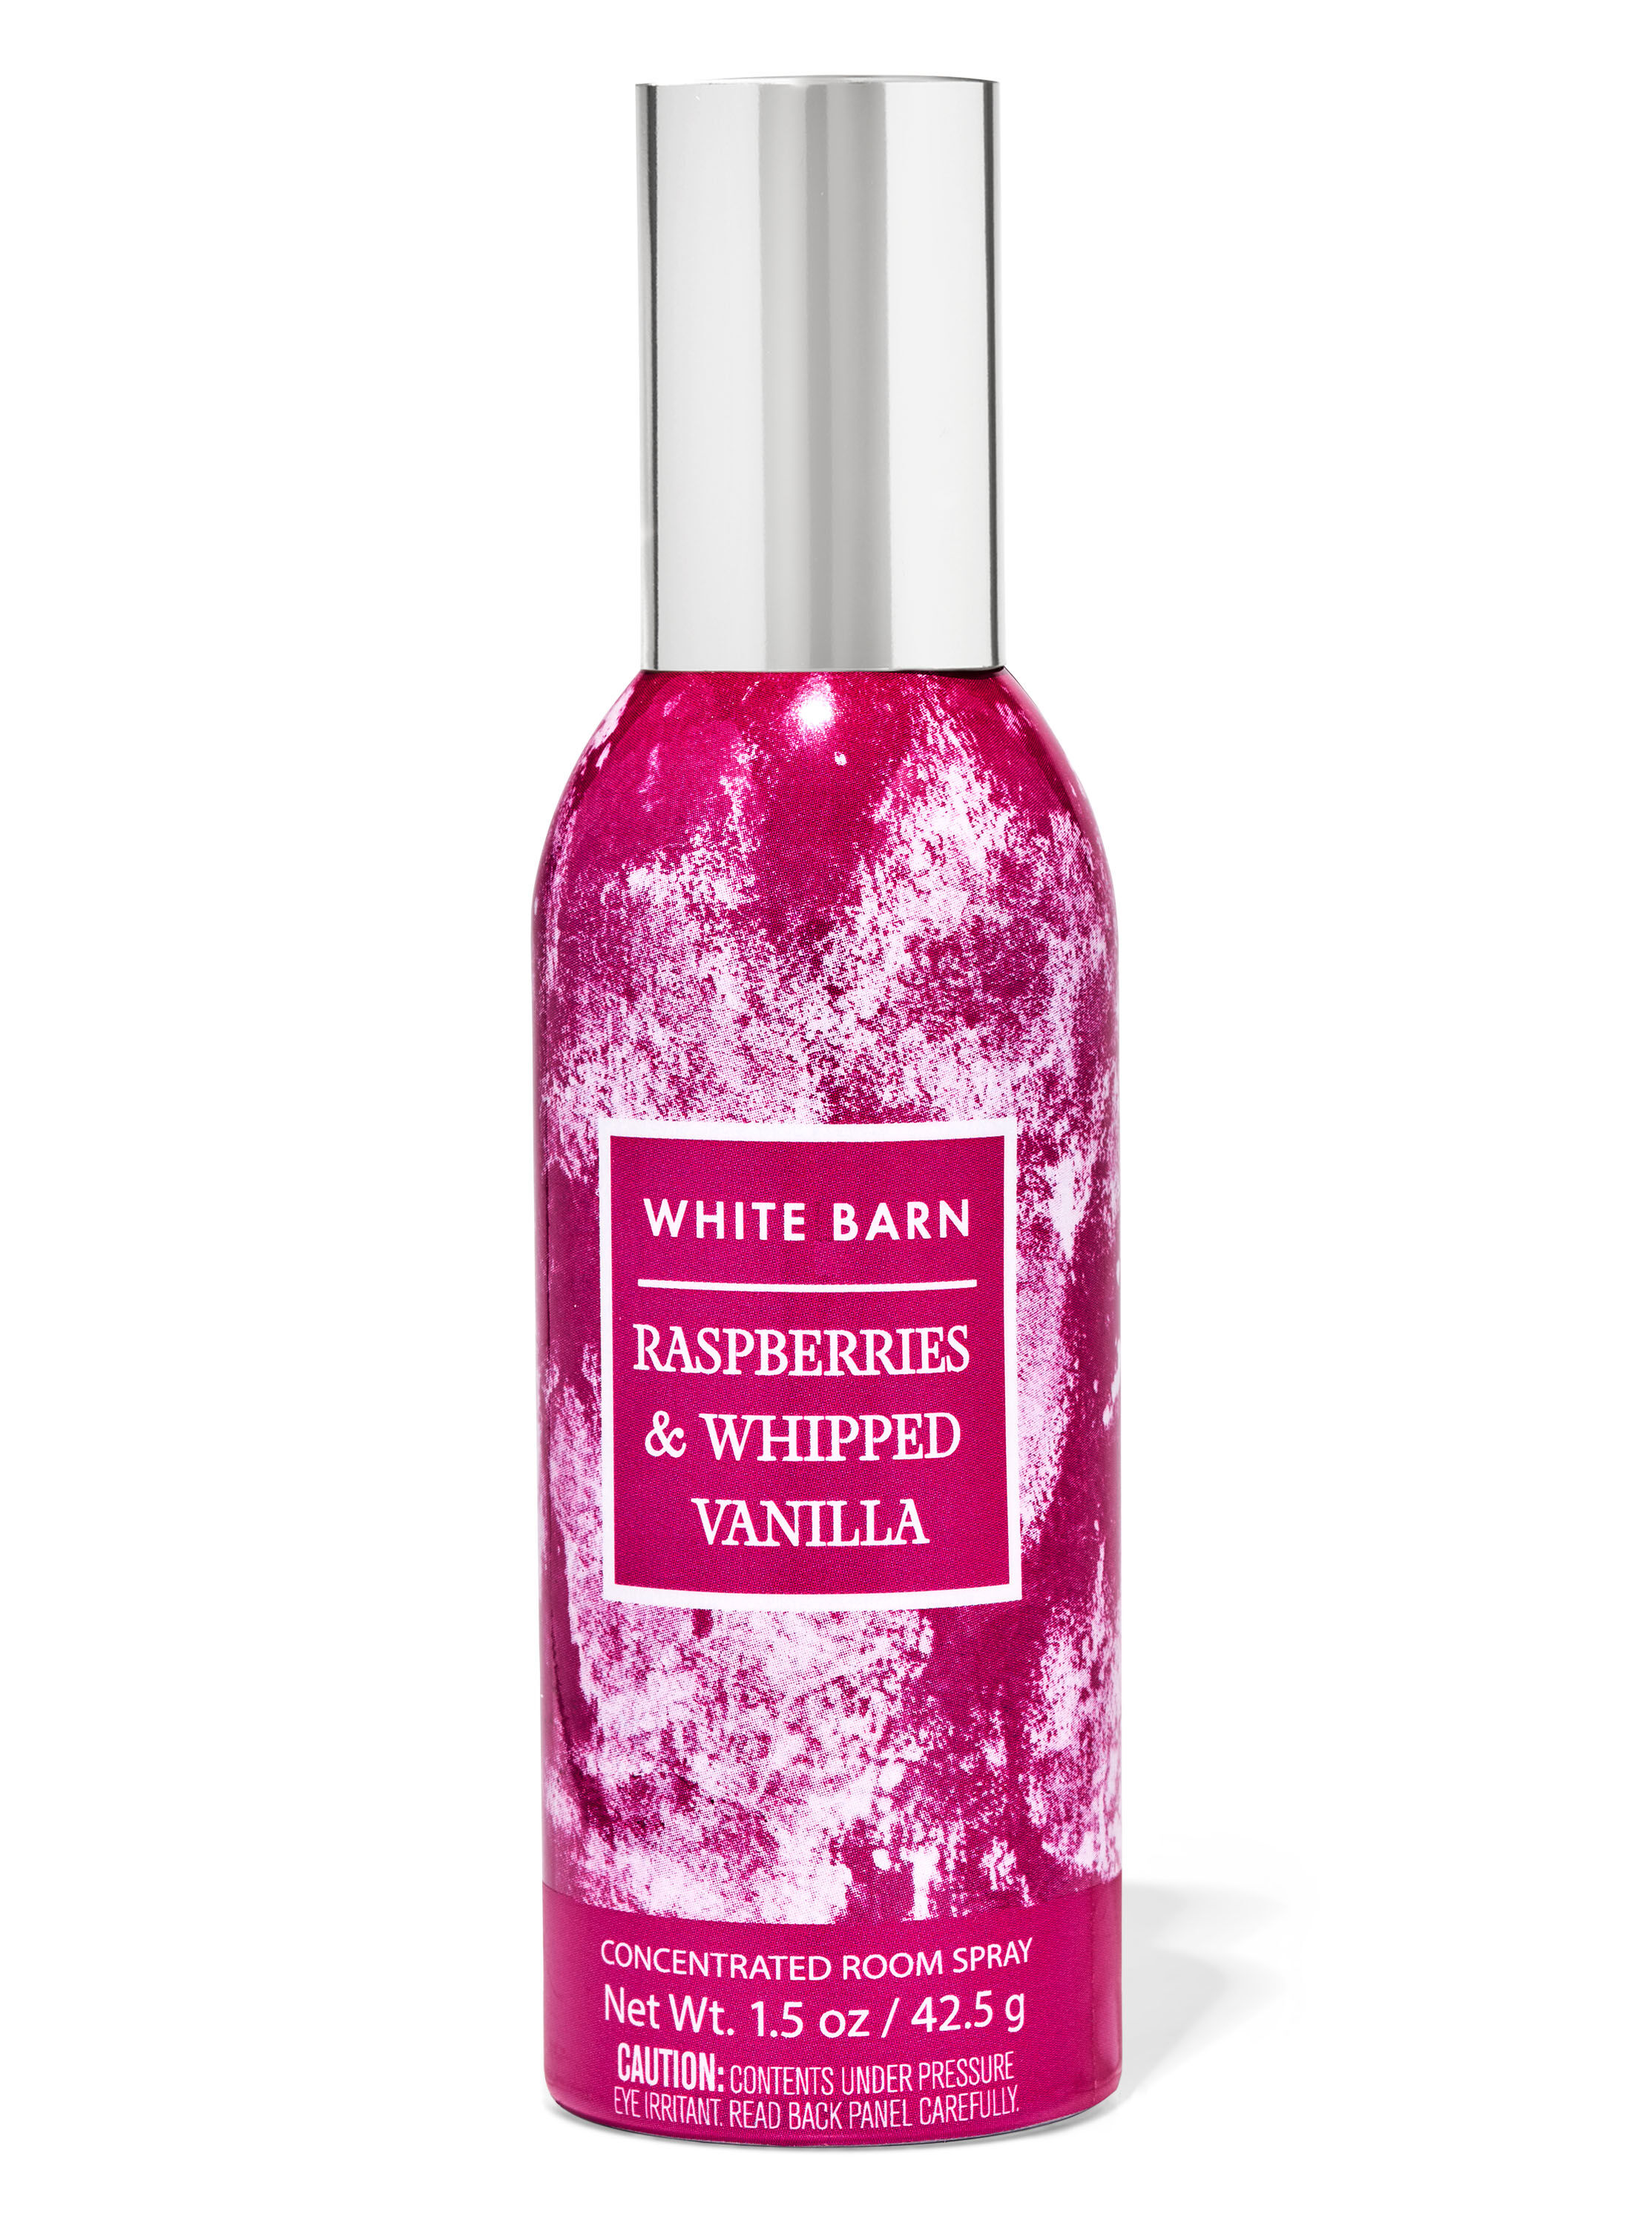 Raspberries & Whipped Vanilla Concentrated Room Spray